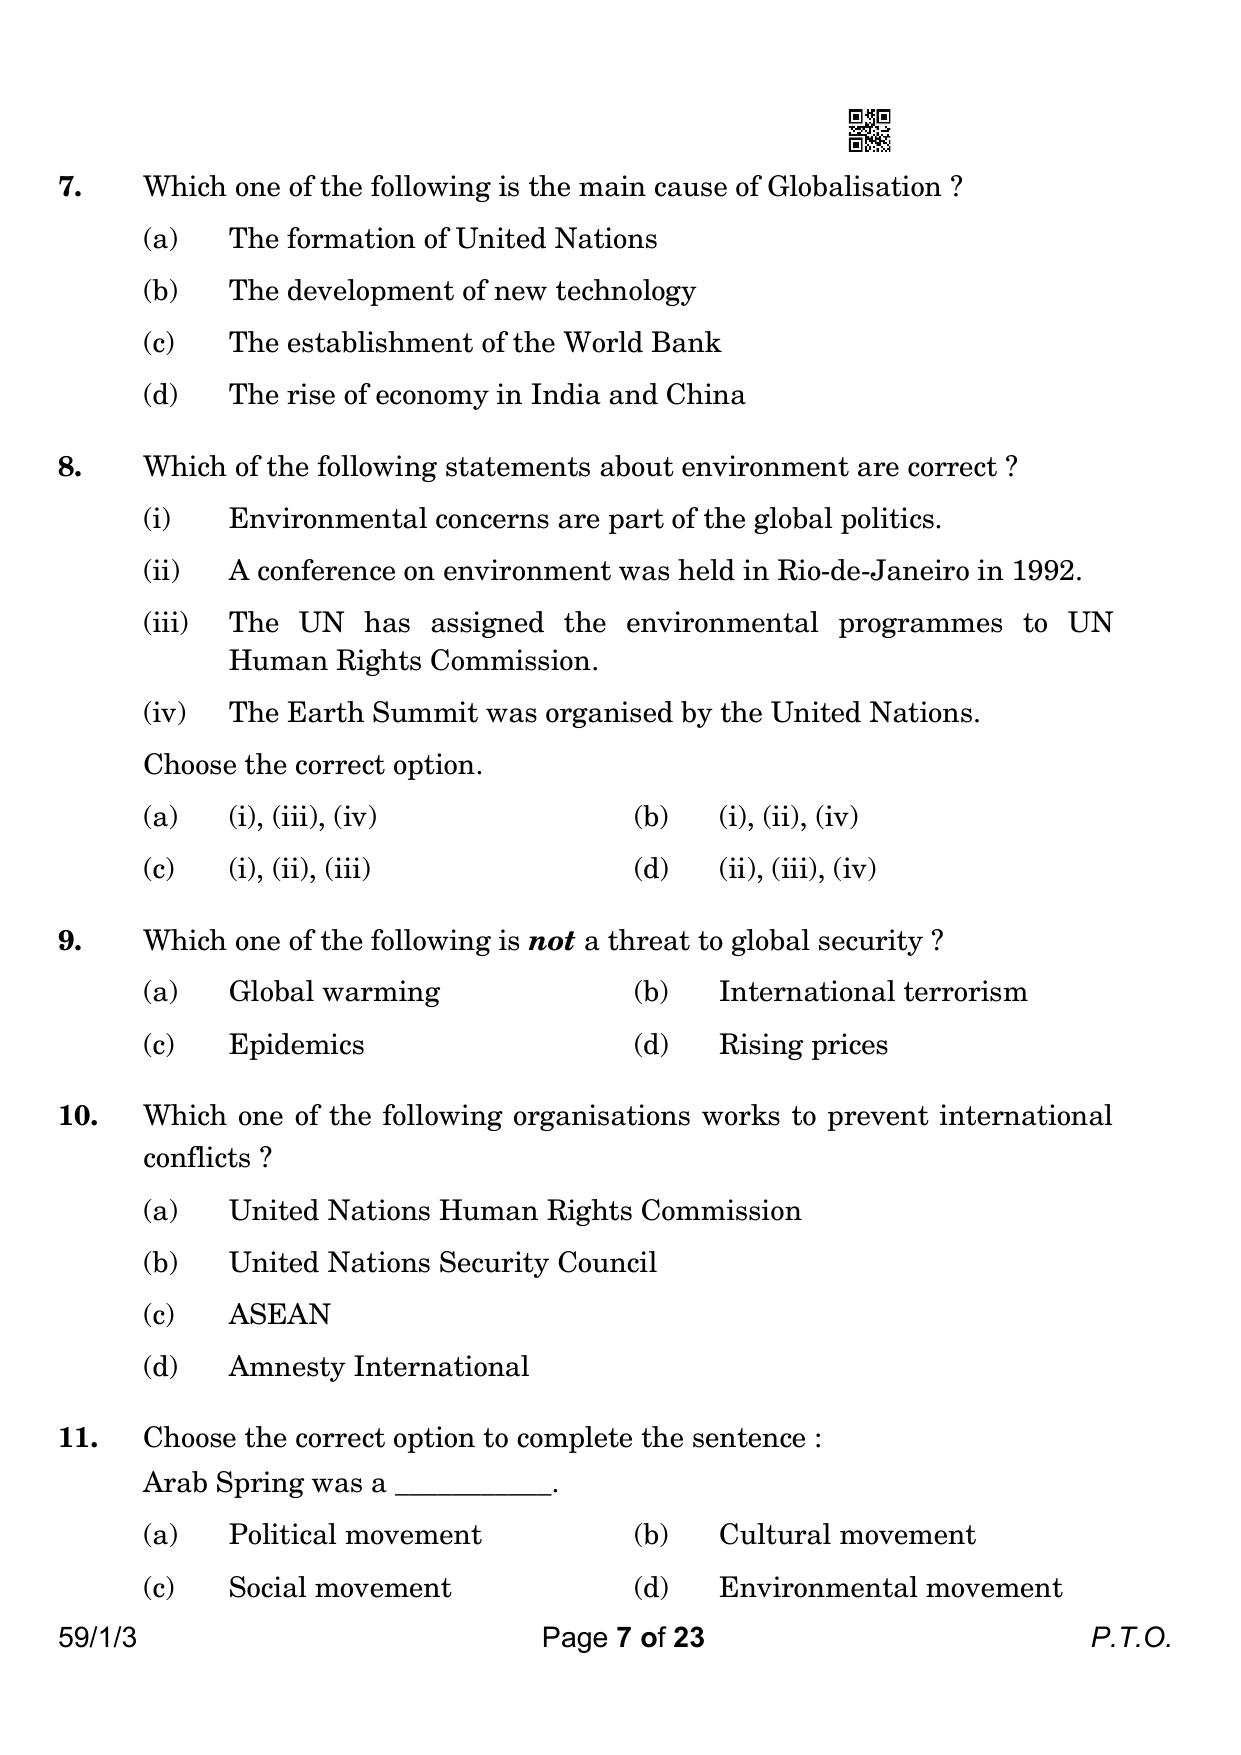 CBSE Class 12 59-1-3 Political Science 2023 Question Paper - Page 7